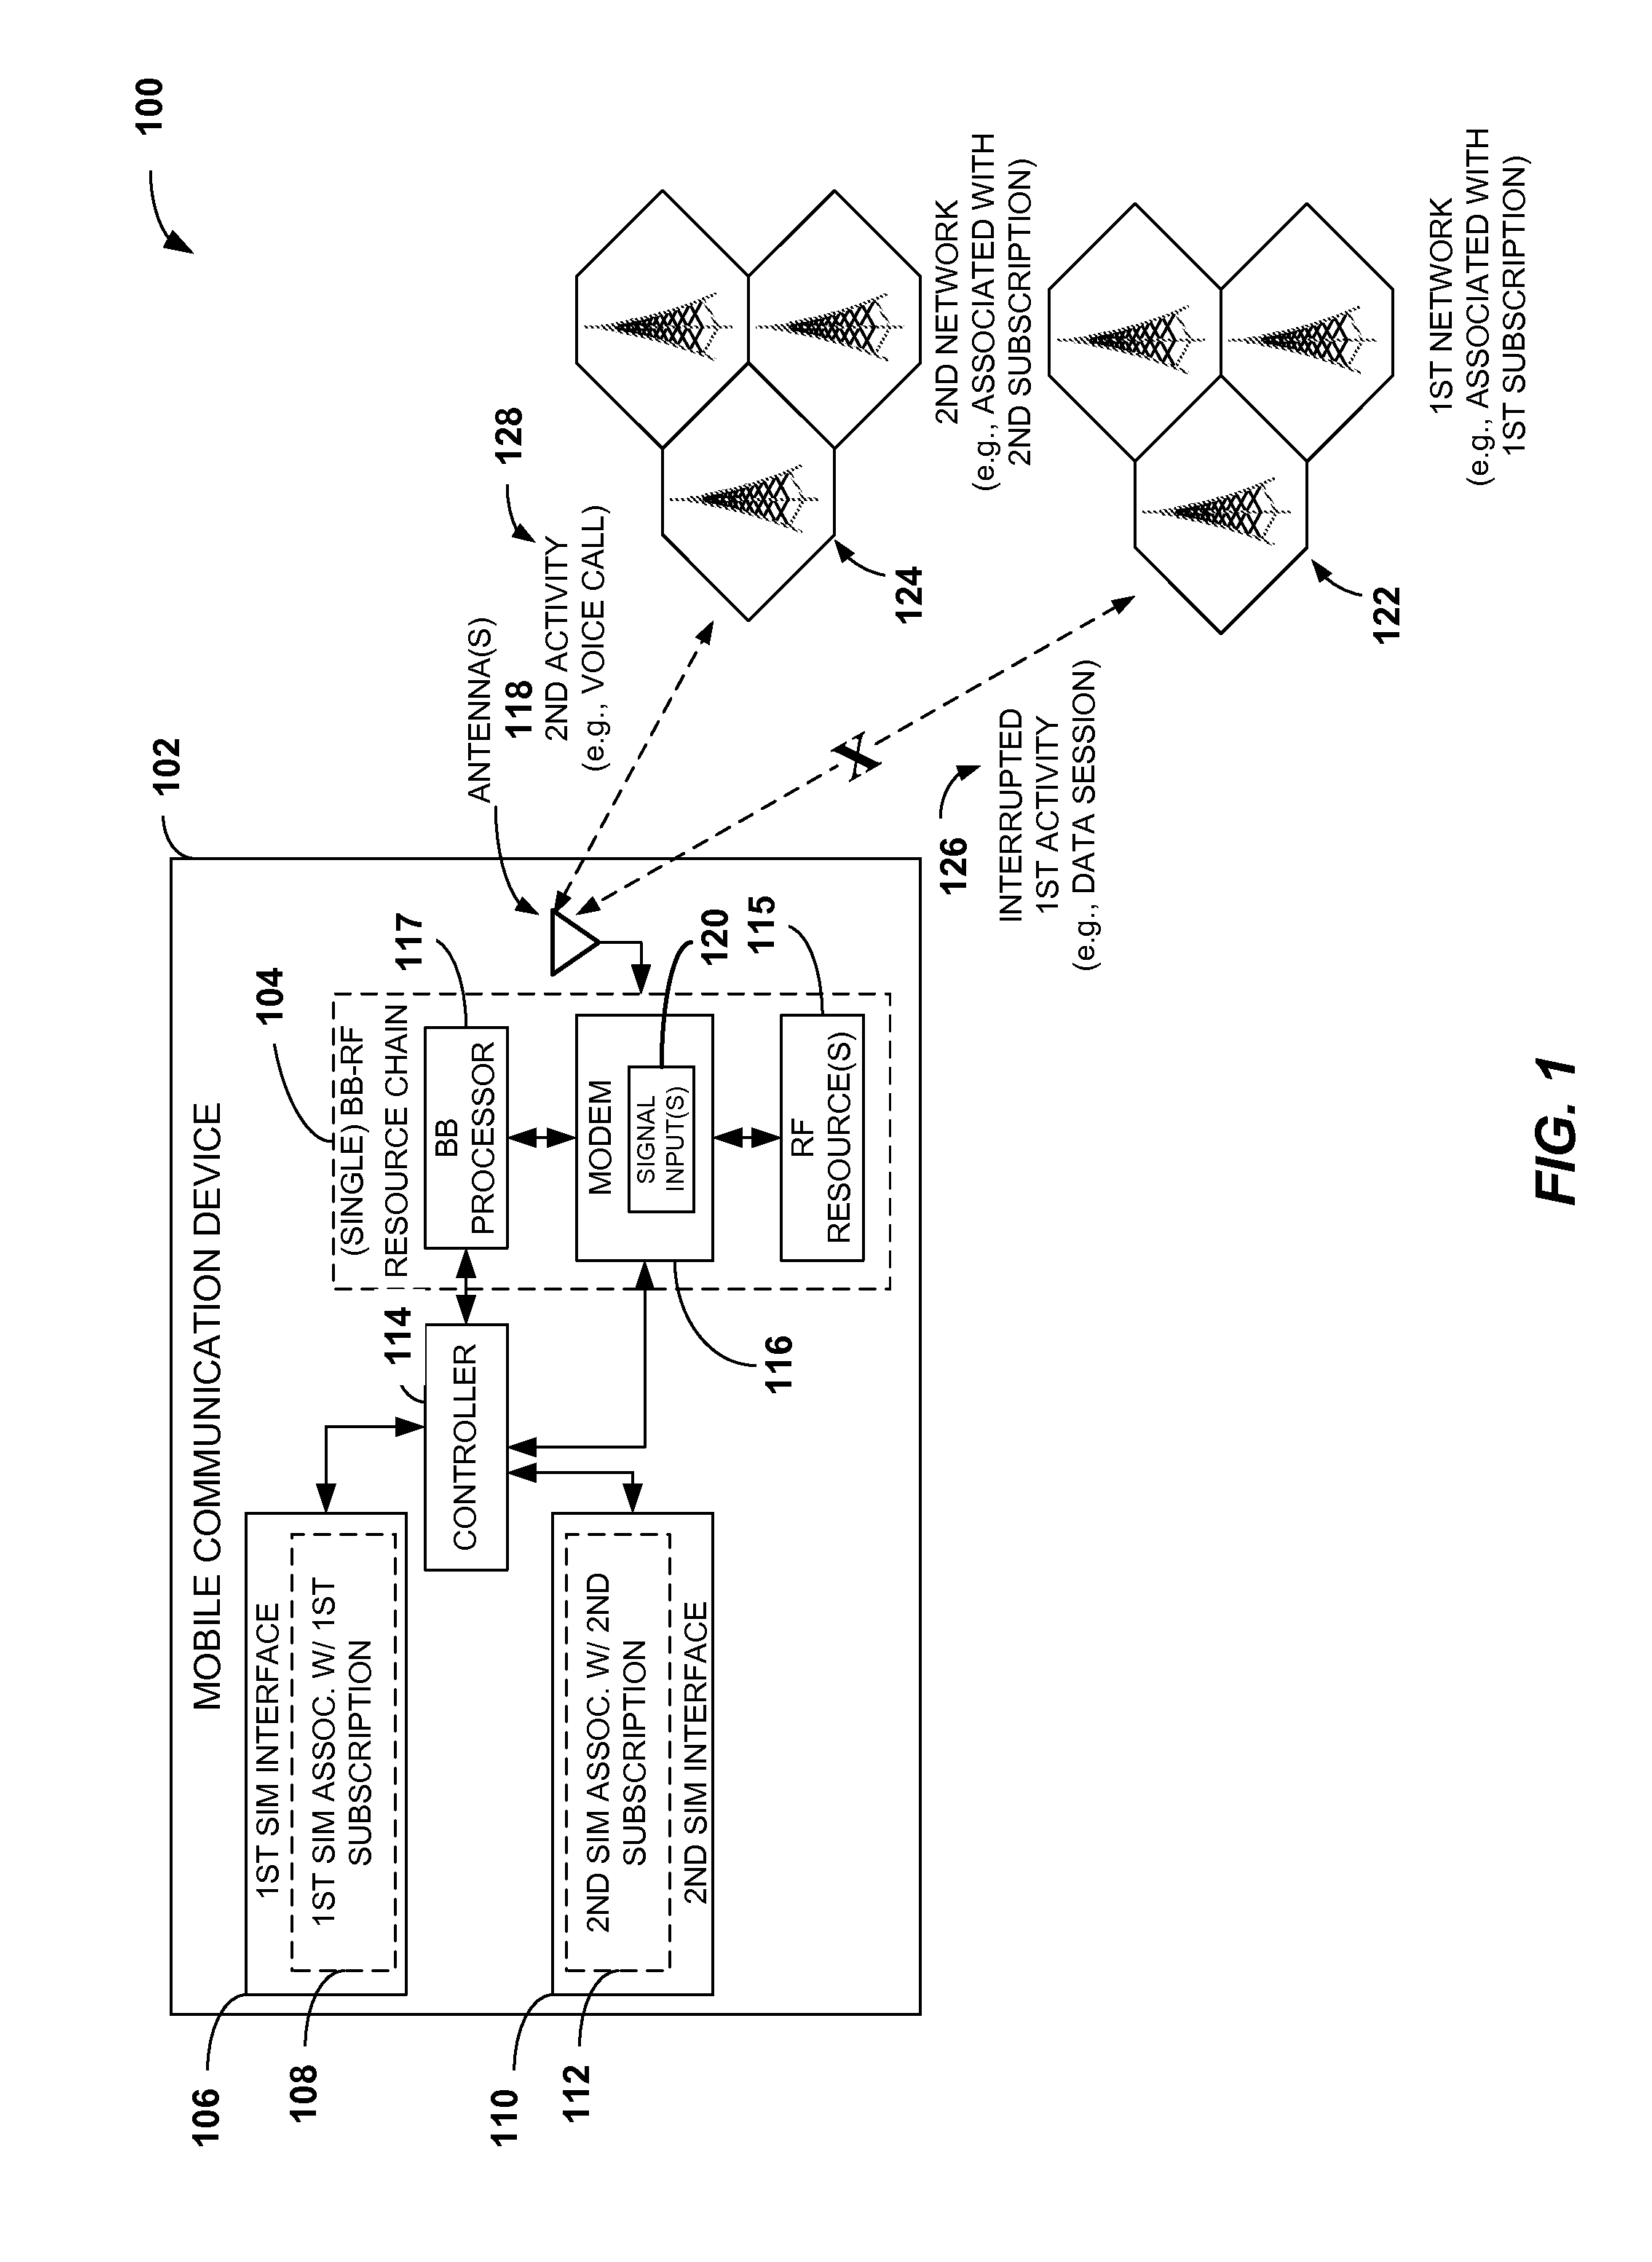 Devices with multiple subscriptions that utilize a single baseband-radio frequency resource chain